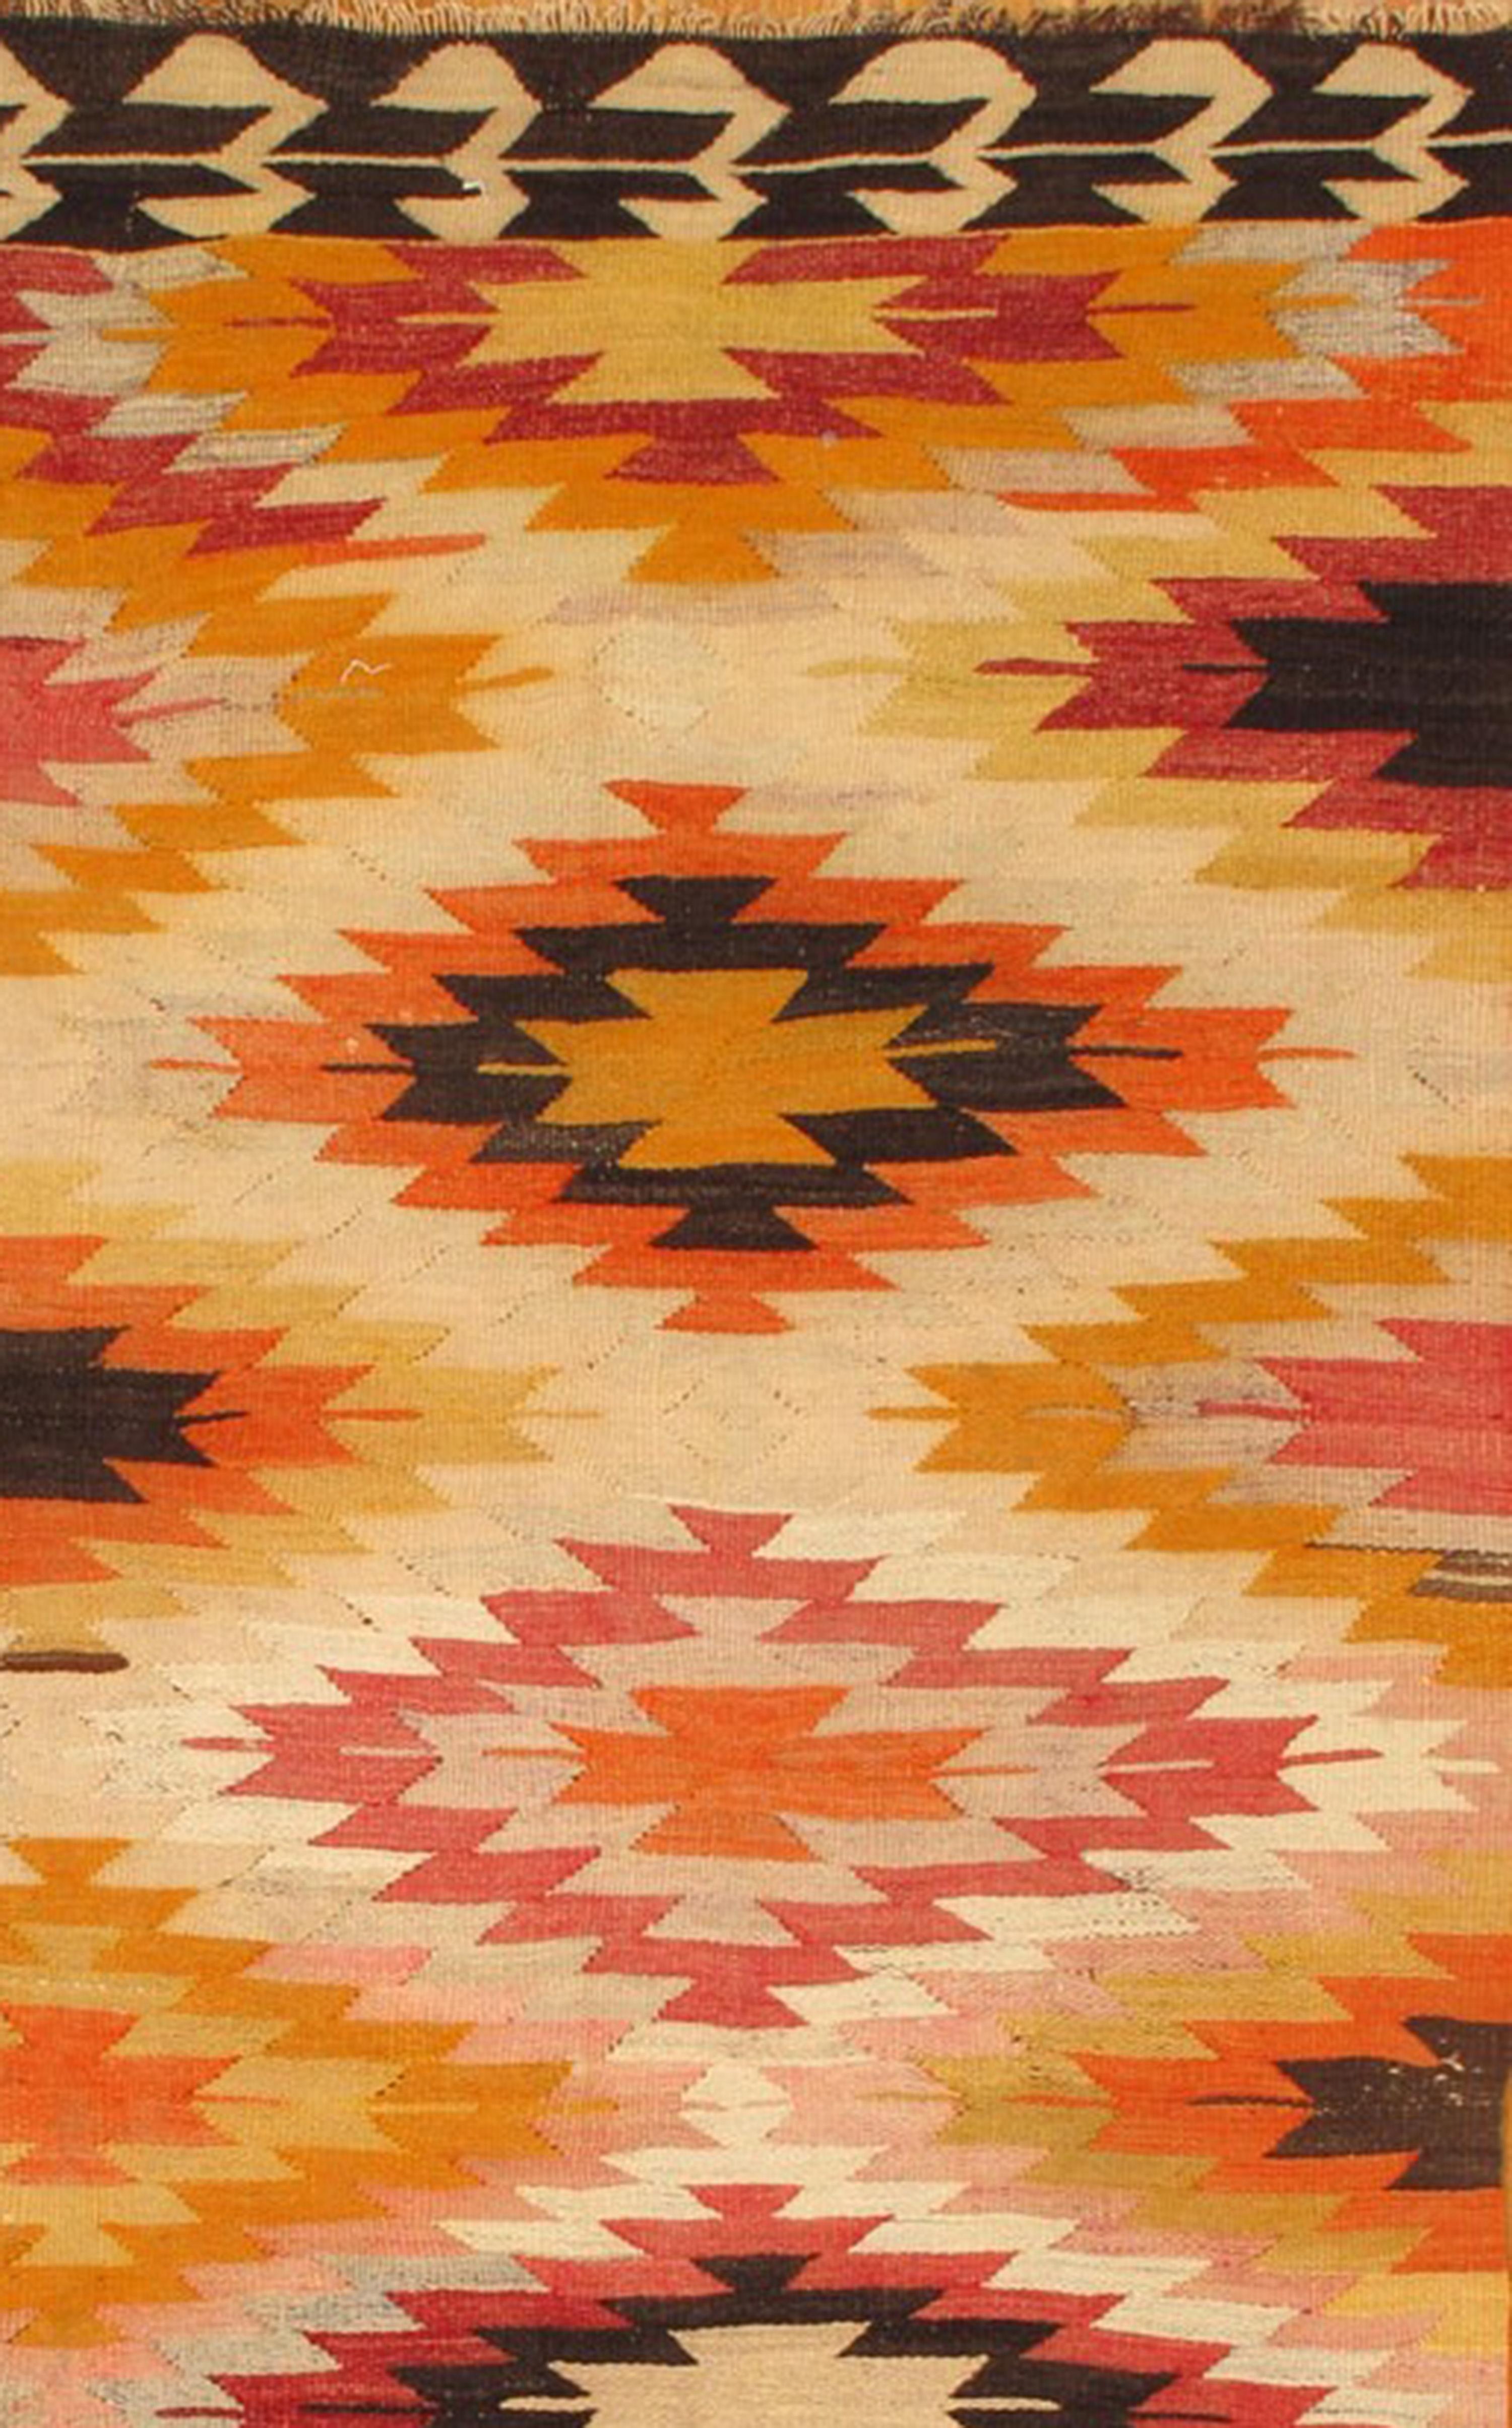 Vintage 1960s Turkish kilim rug with a multicolor all-over geometric design. Measures: 6.02 x 11.